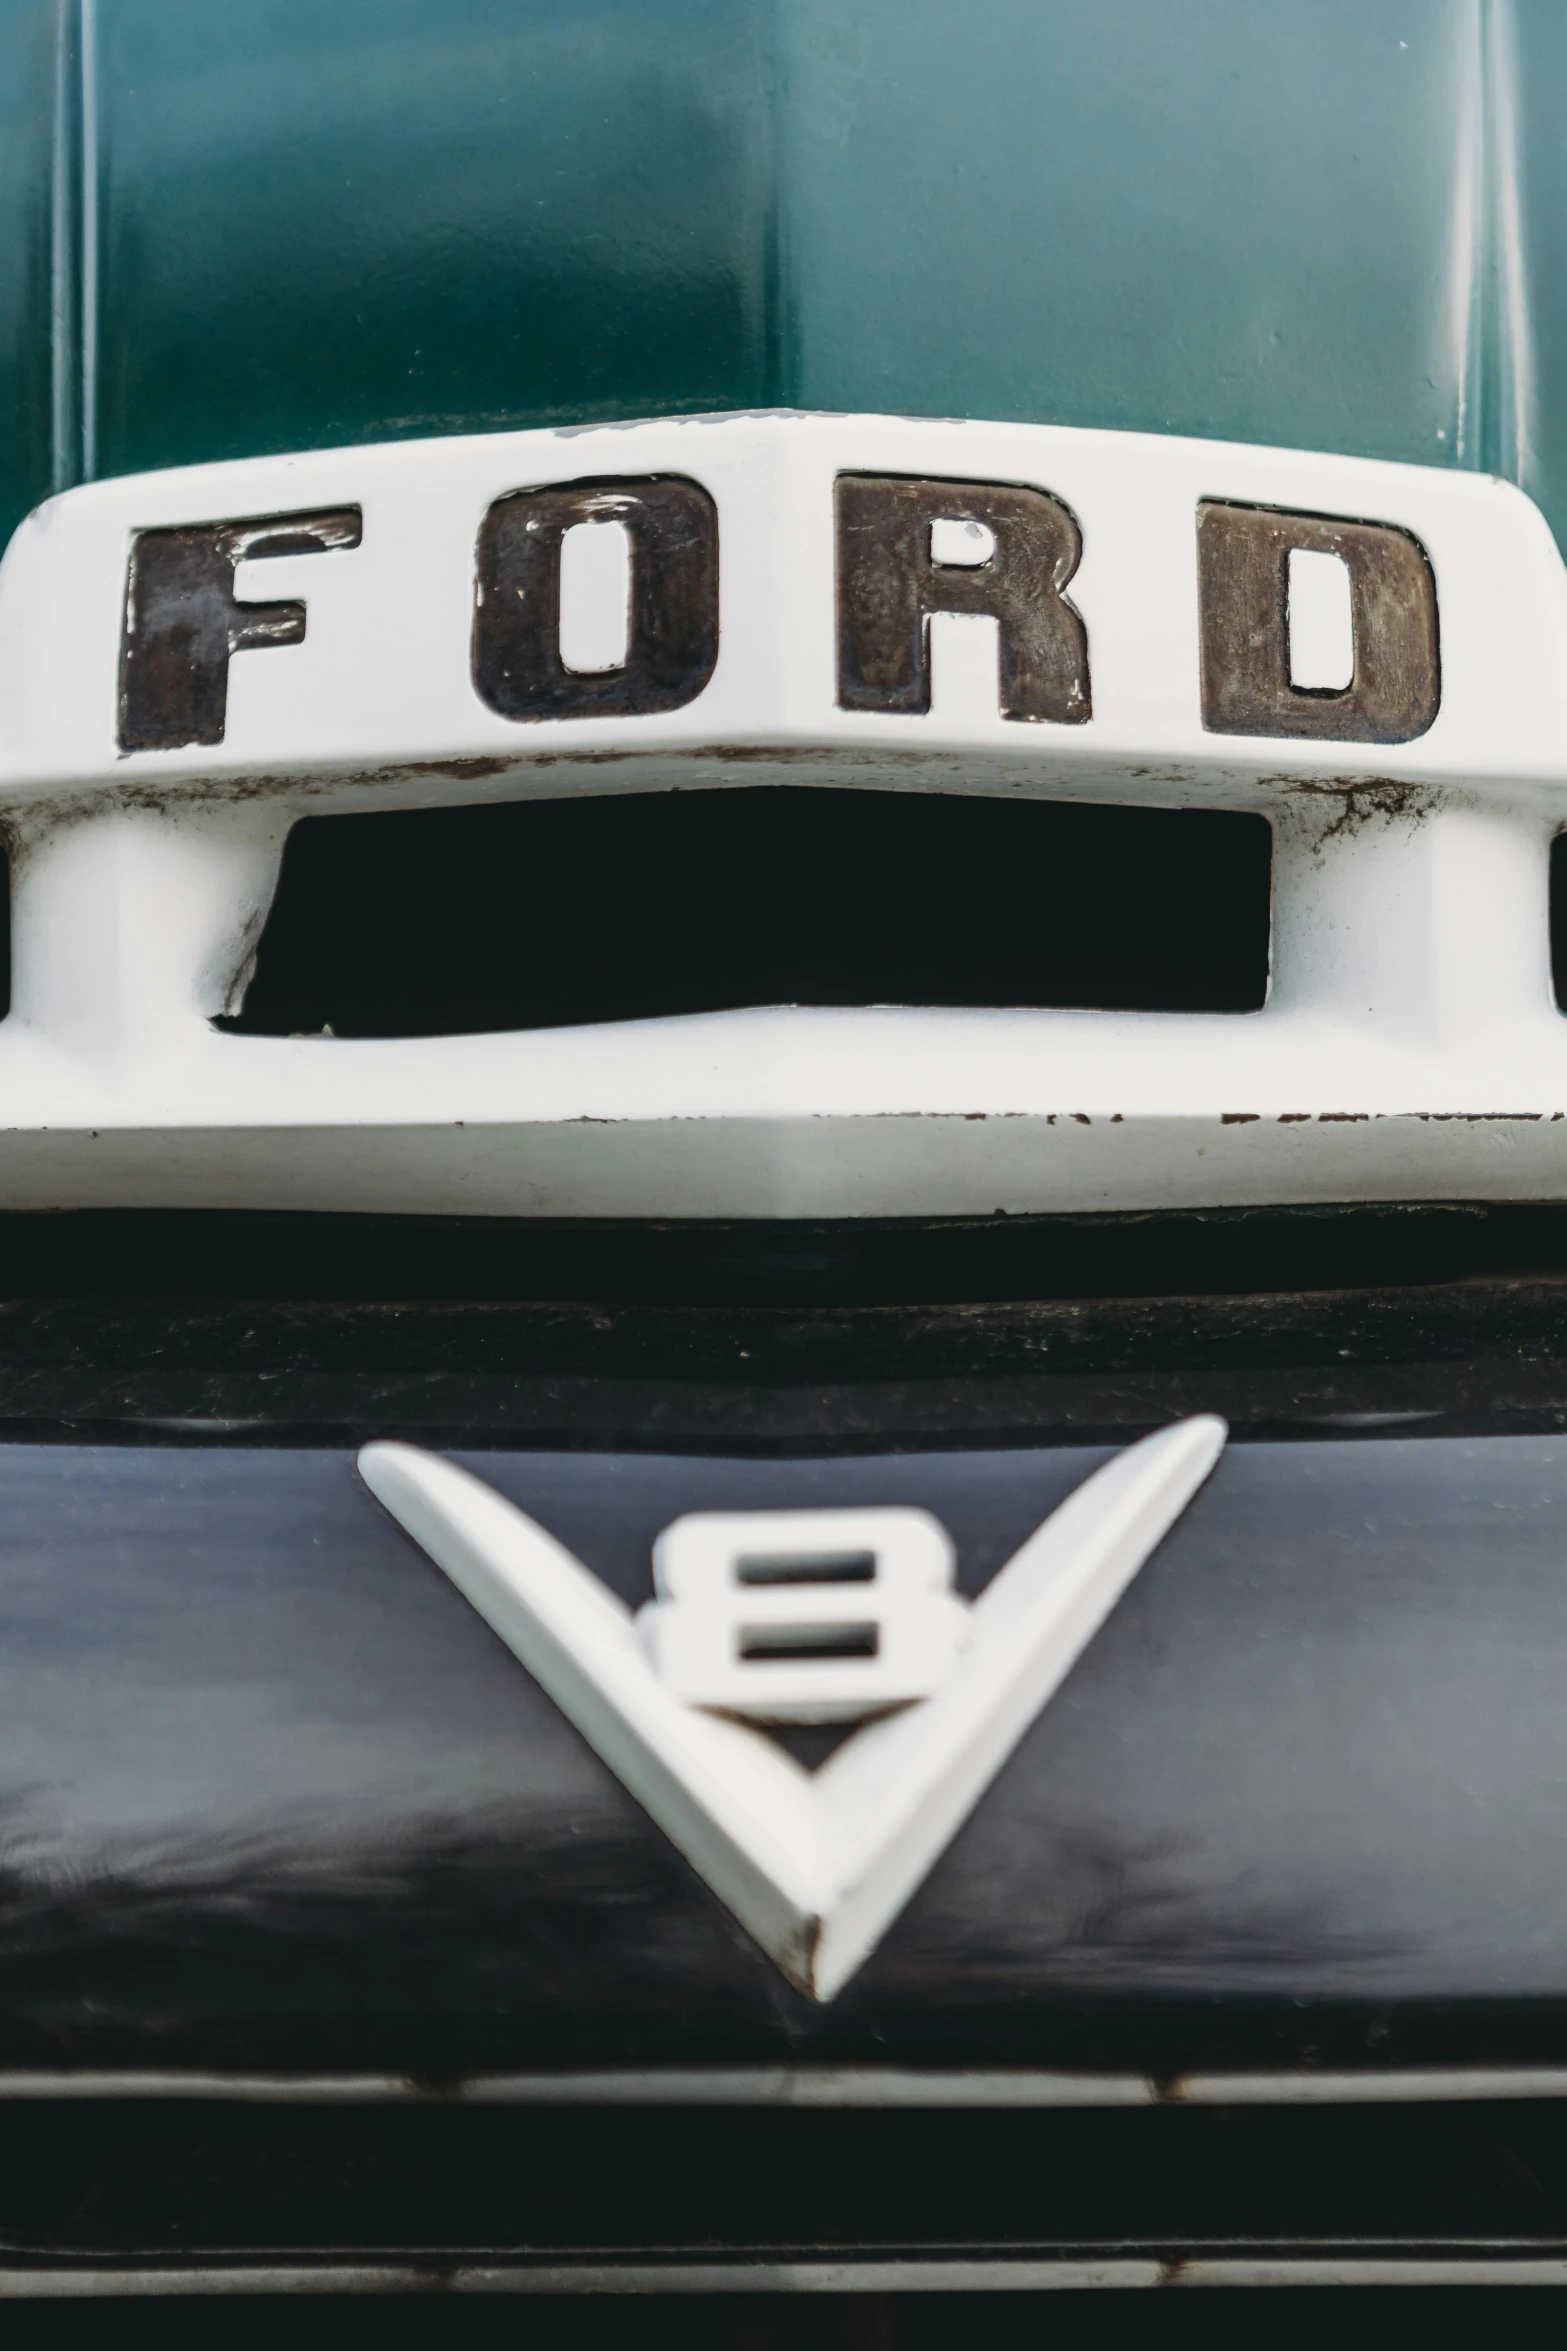 the emblem of a ford vehicle on the hood